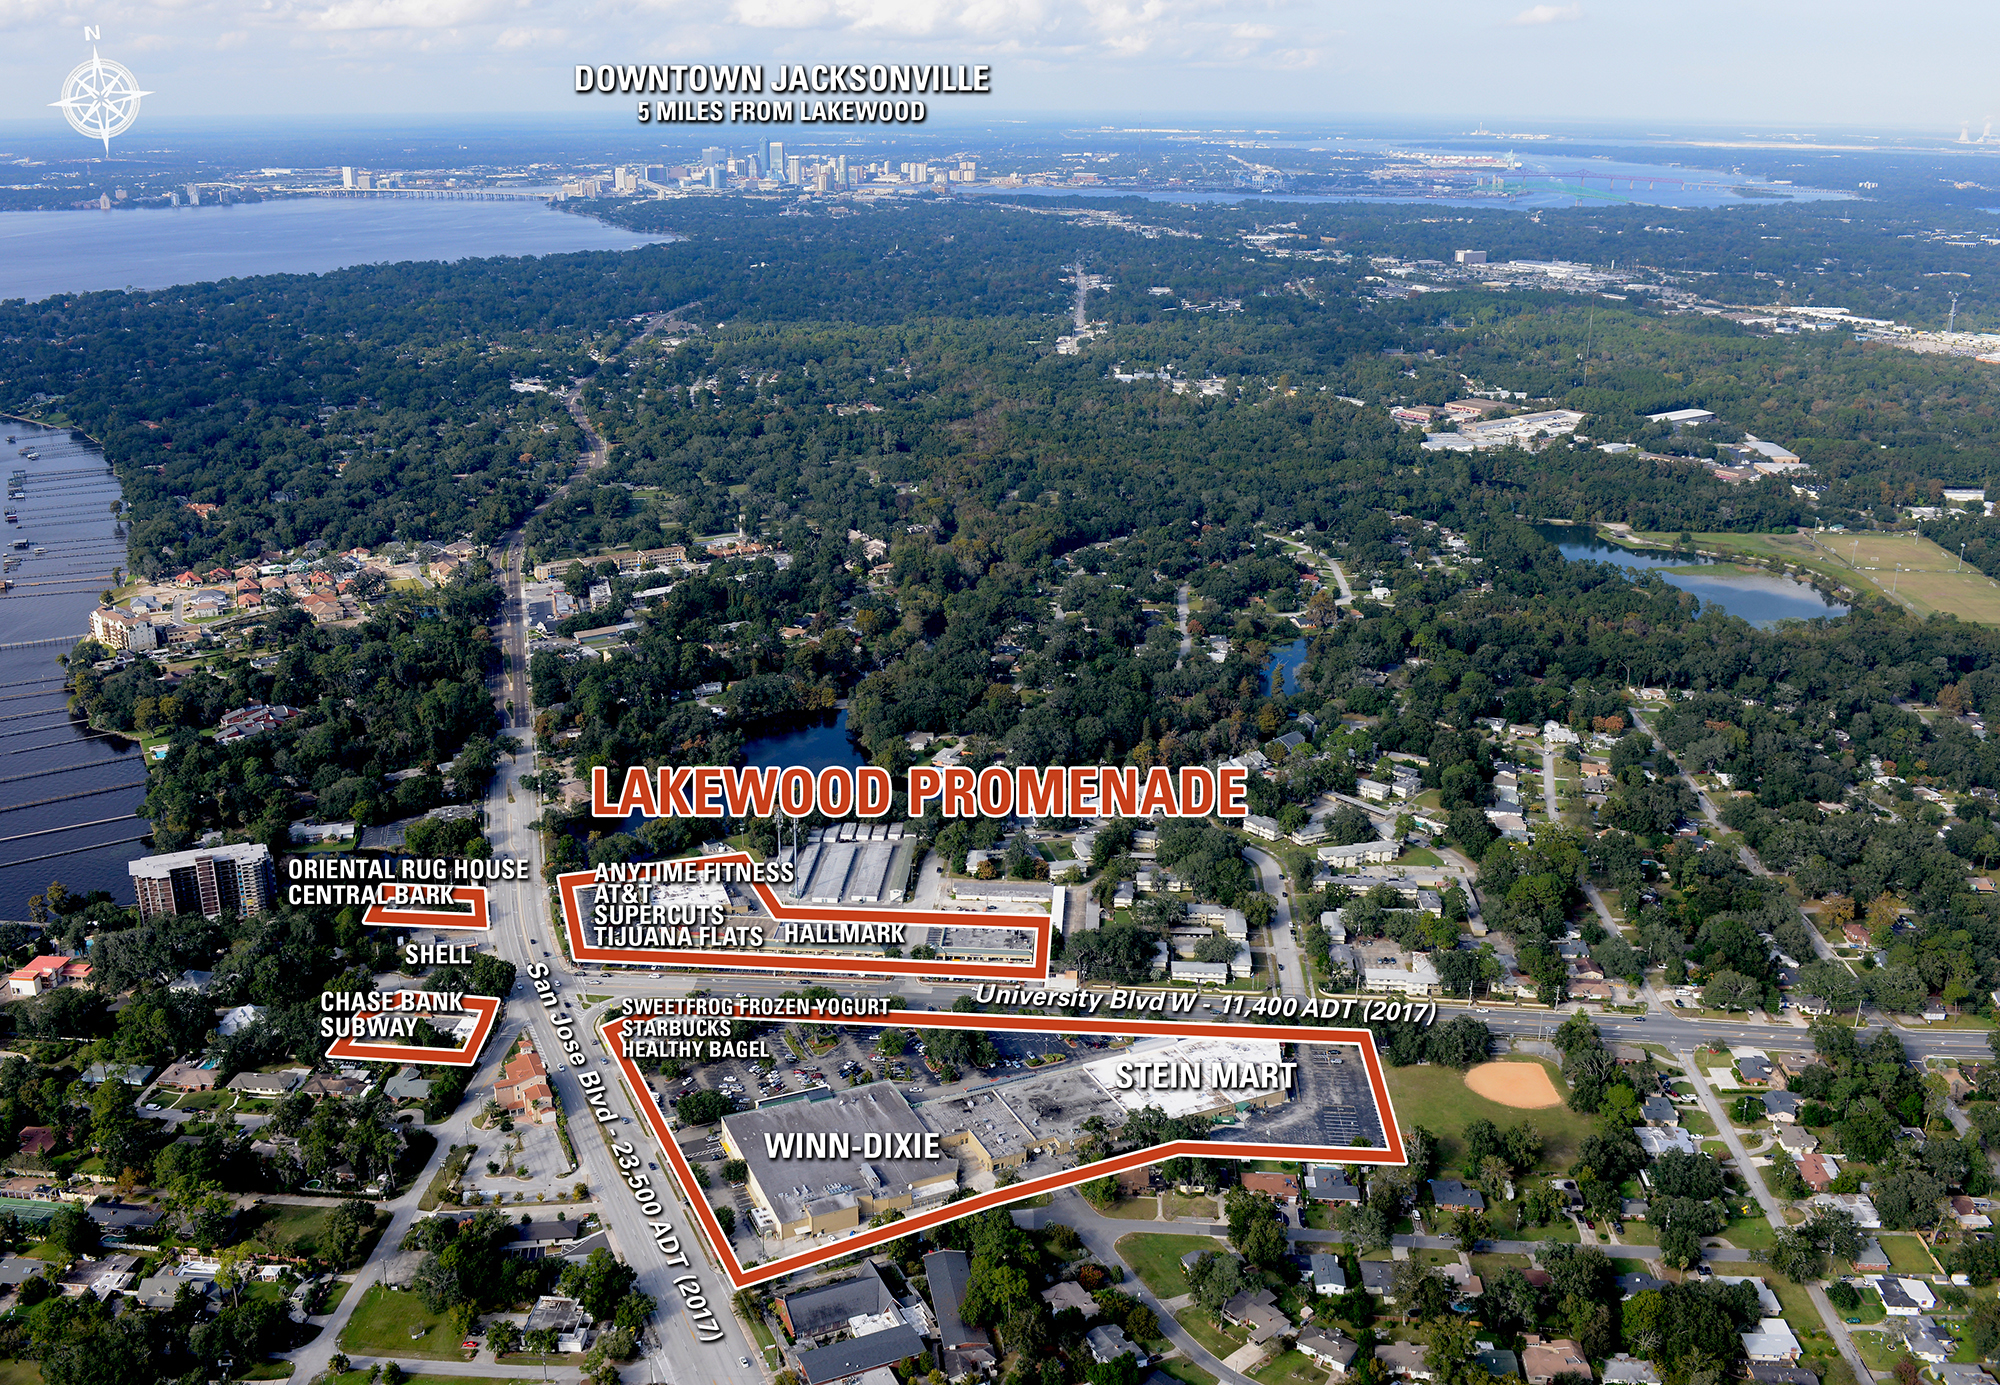 The aerial view of Lakewood Promenade outlines the property bought by Sleiman Enterprises.